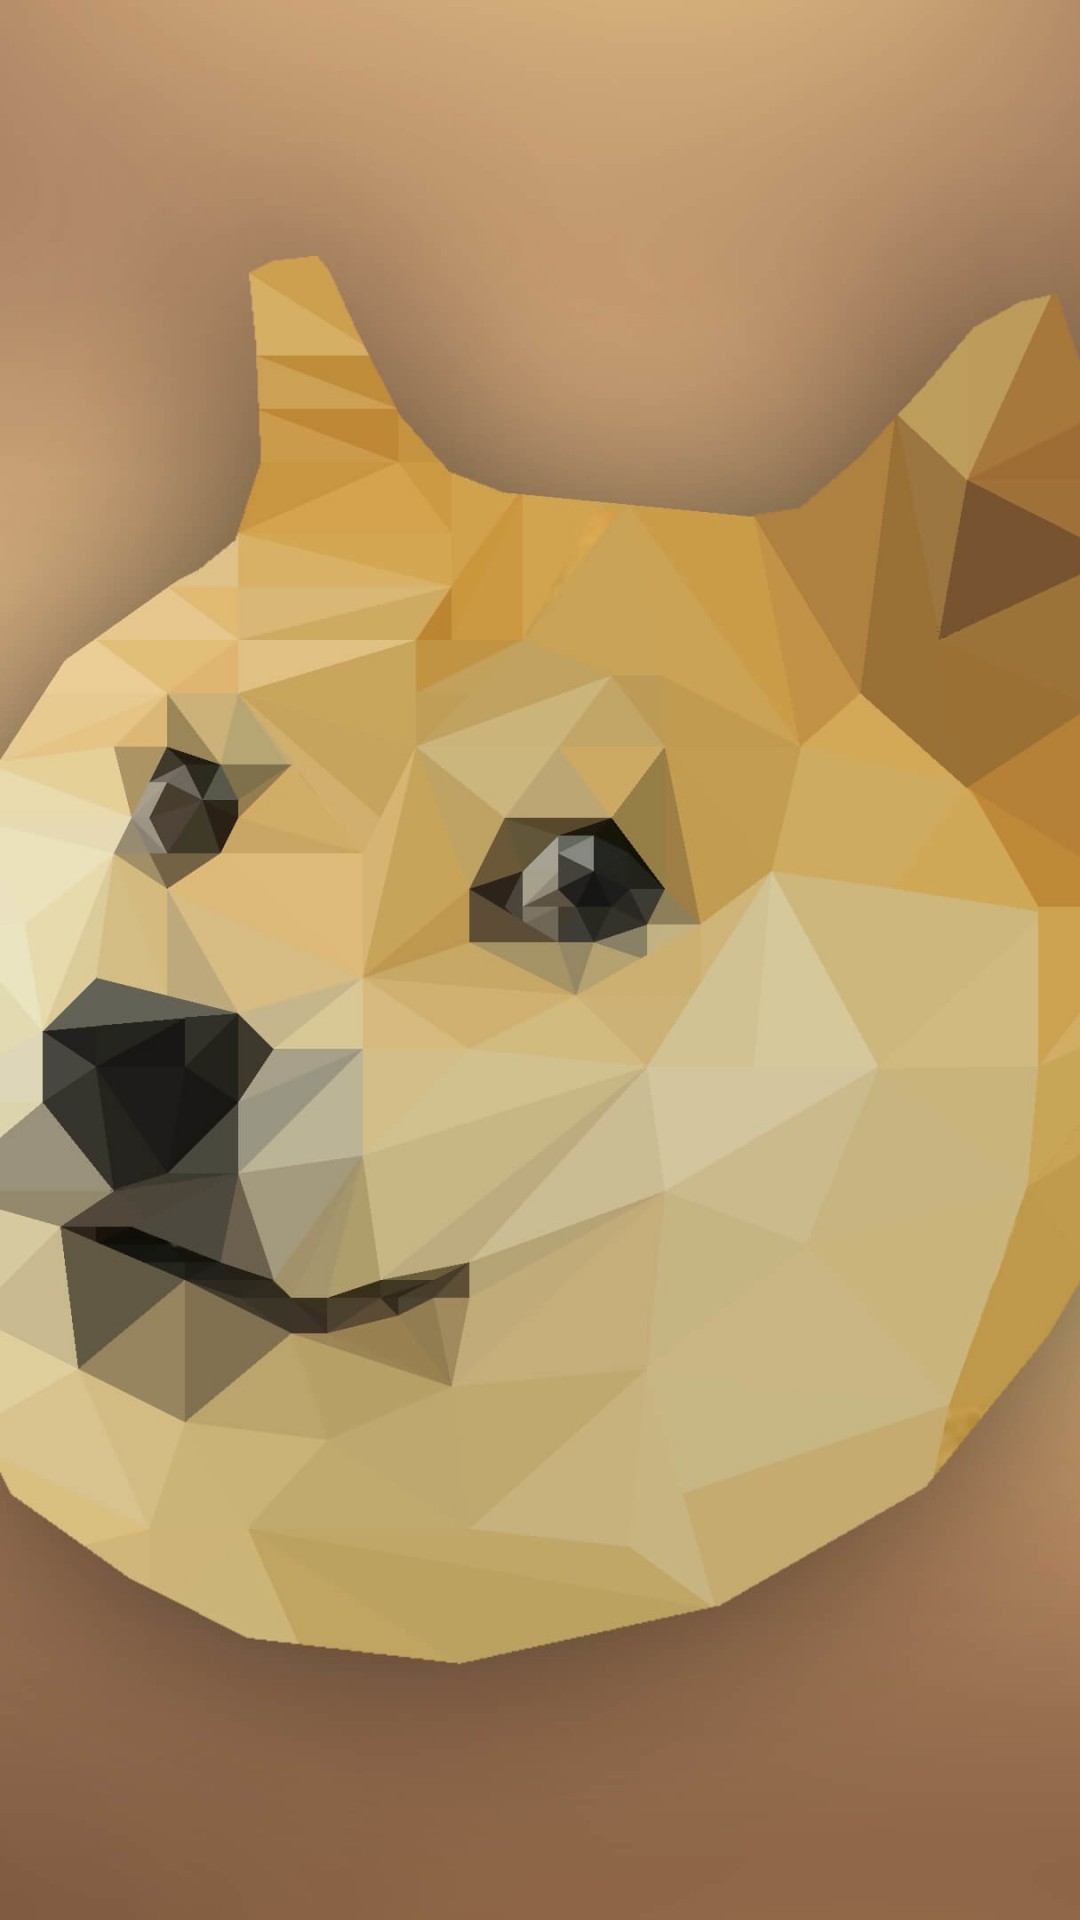 Low Poly Doge Wallpaper for SAMSUNG Galaxy S5